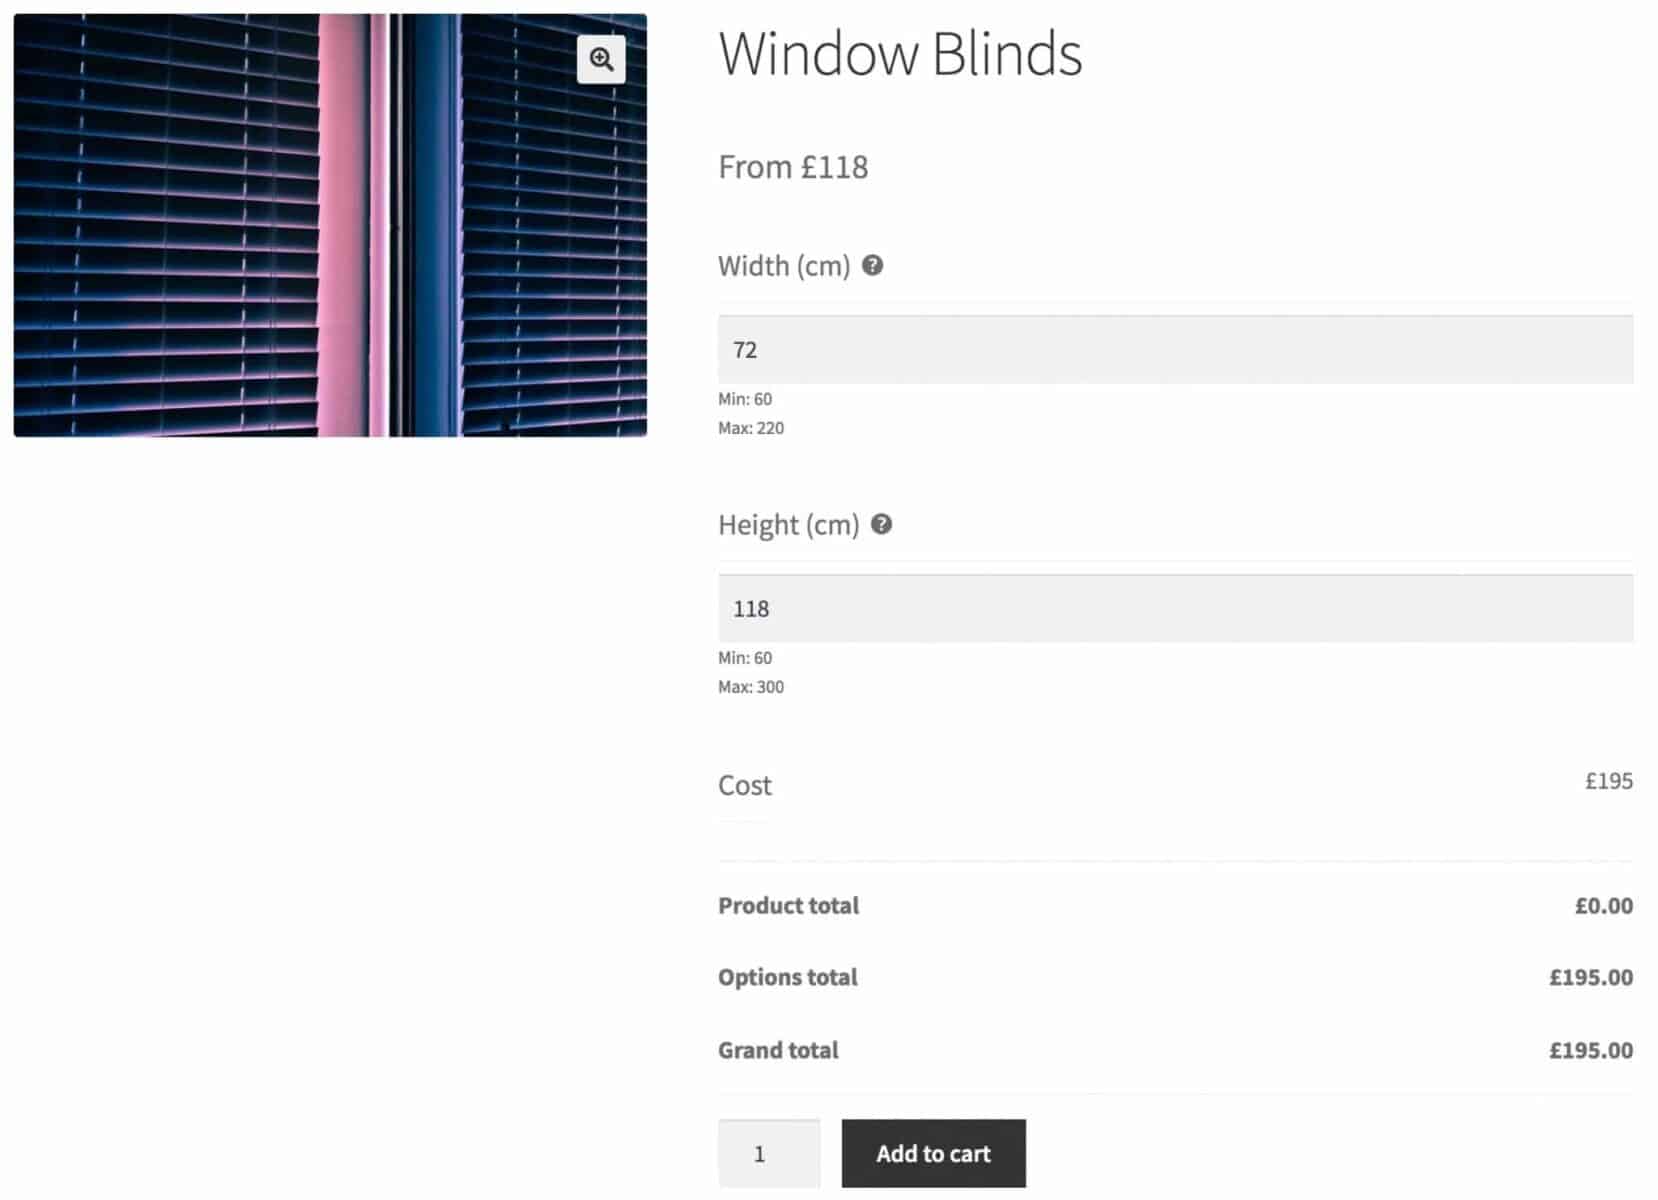 WooCommerce pricing matrix for window blinds